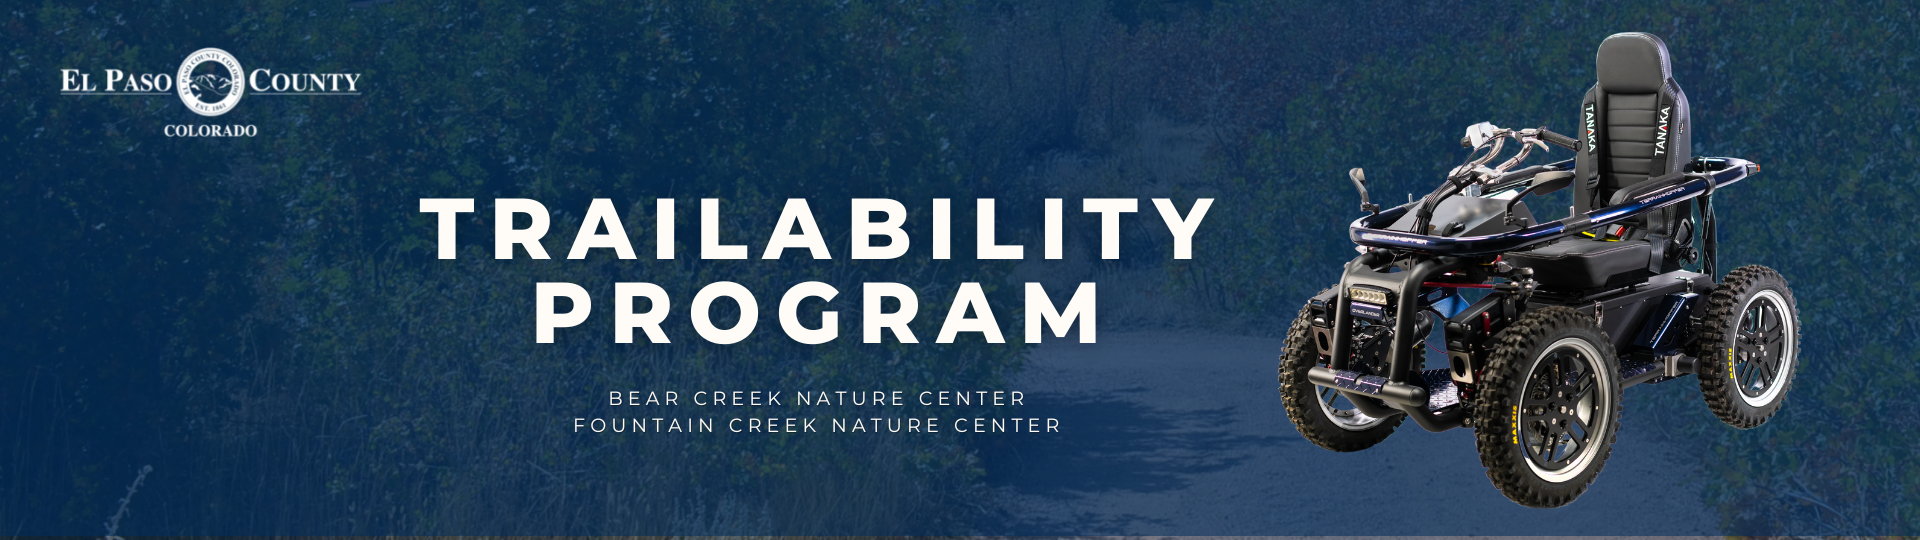 Blue background image with the El Paso County Logo in upper left corner, text "Trailability Program | Bear Creek Nature Center Fountain Creek Nature Center" with an image of a terrain hopper on right side